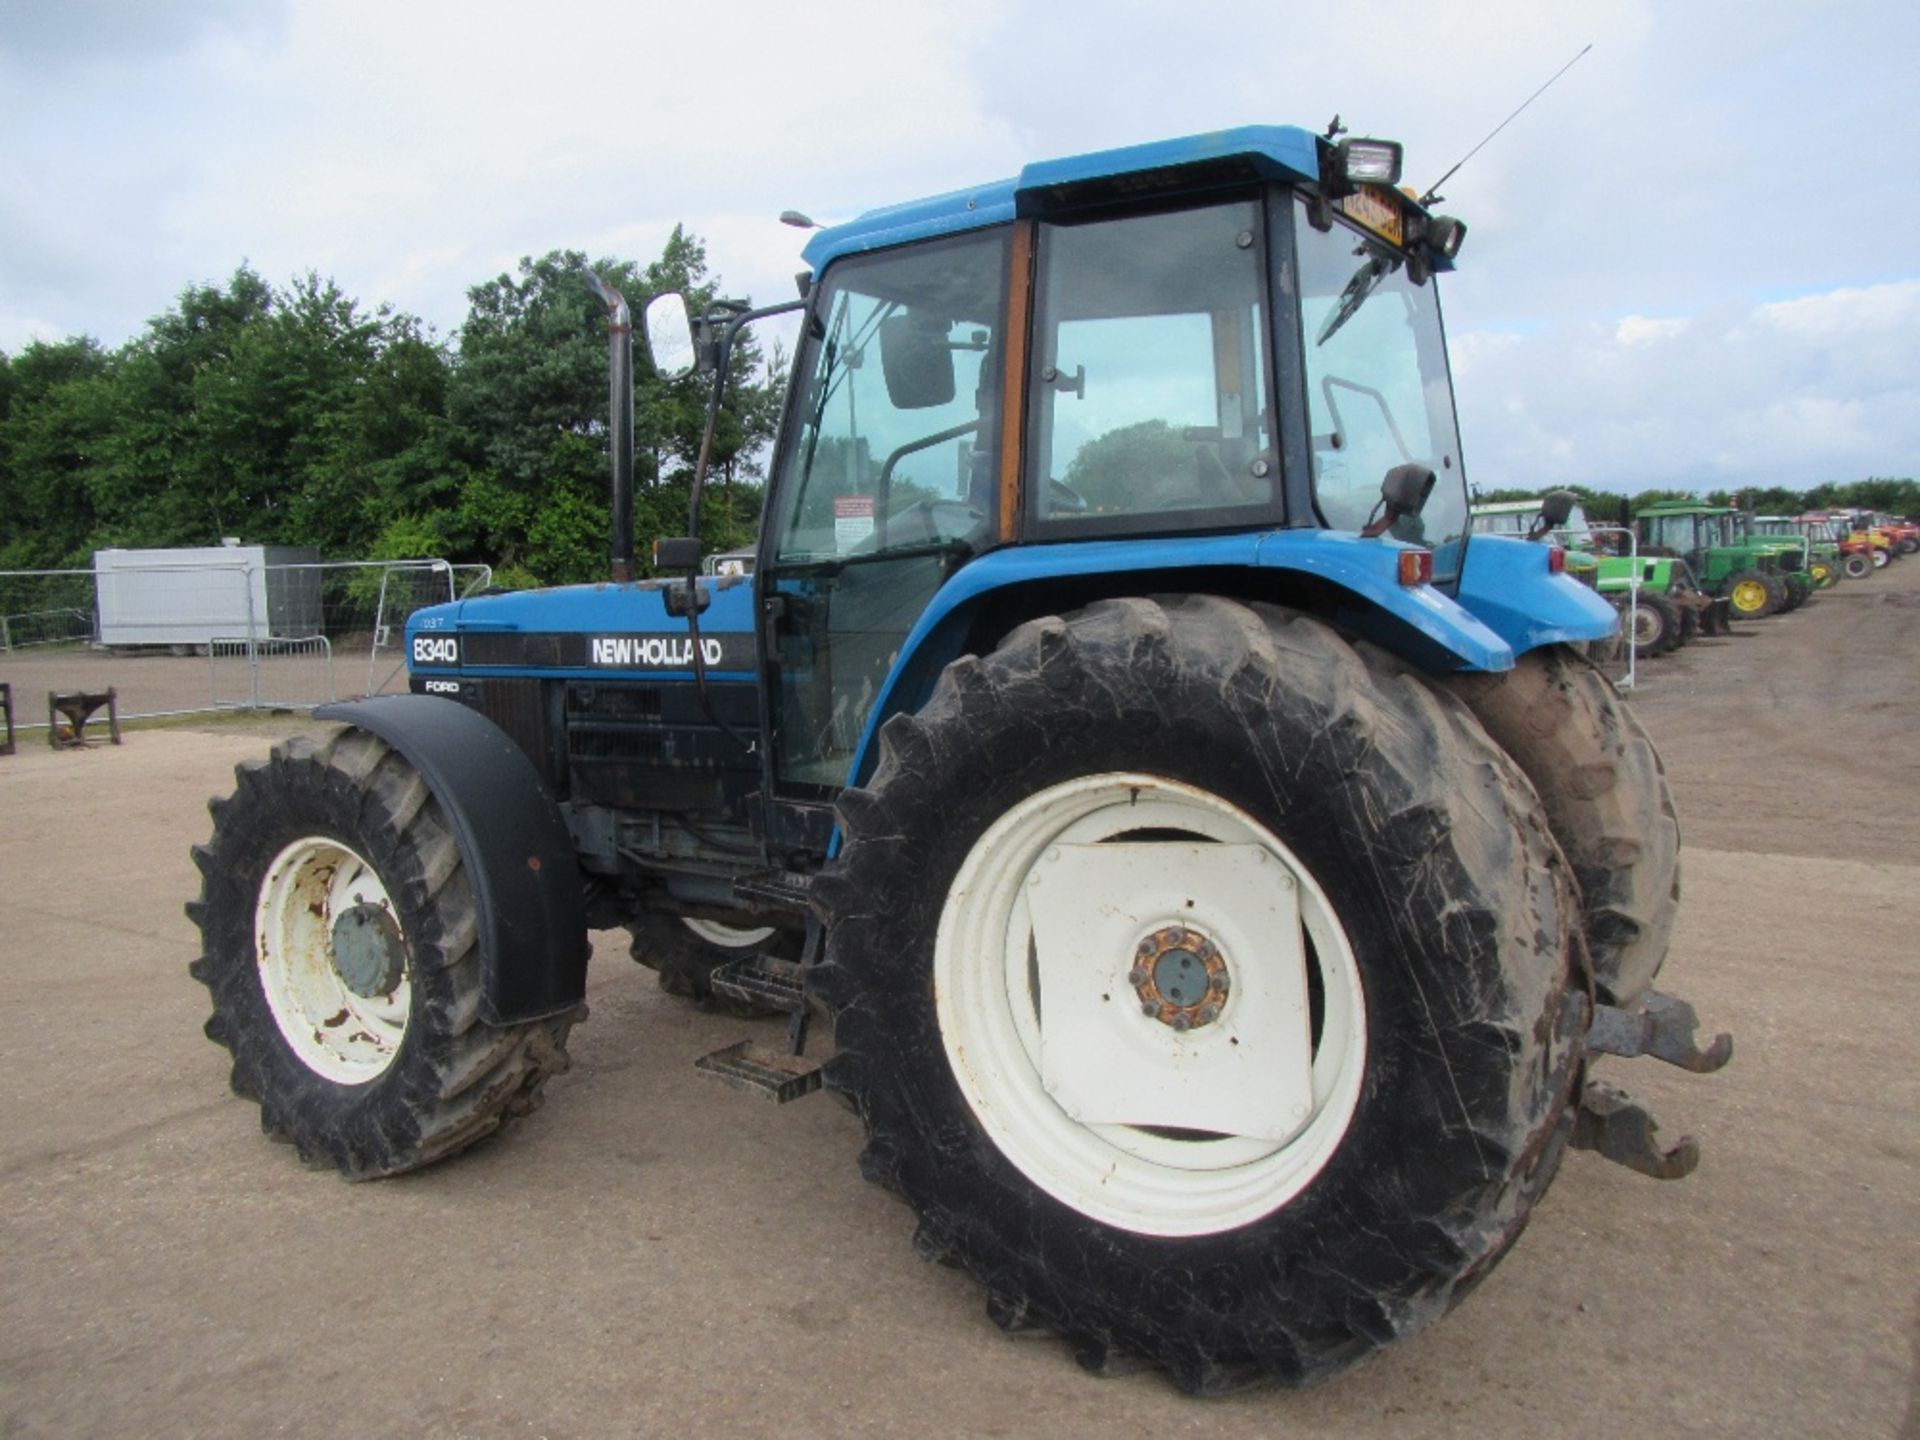 New Holland 8340 SLE 4wd Tractor. Reg. No. N243 SCN Ser. No. 025324B - Image 20 of 20